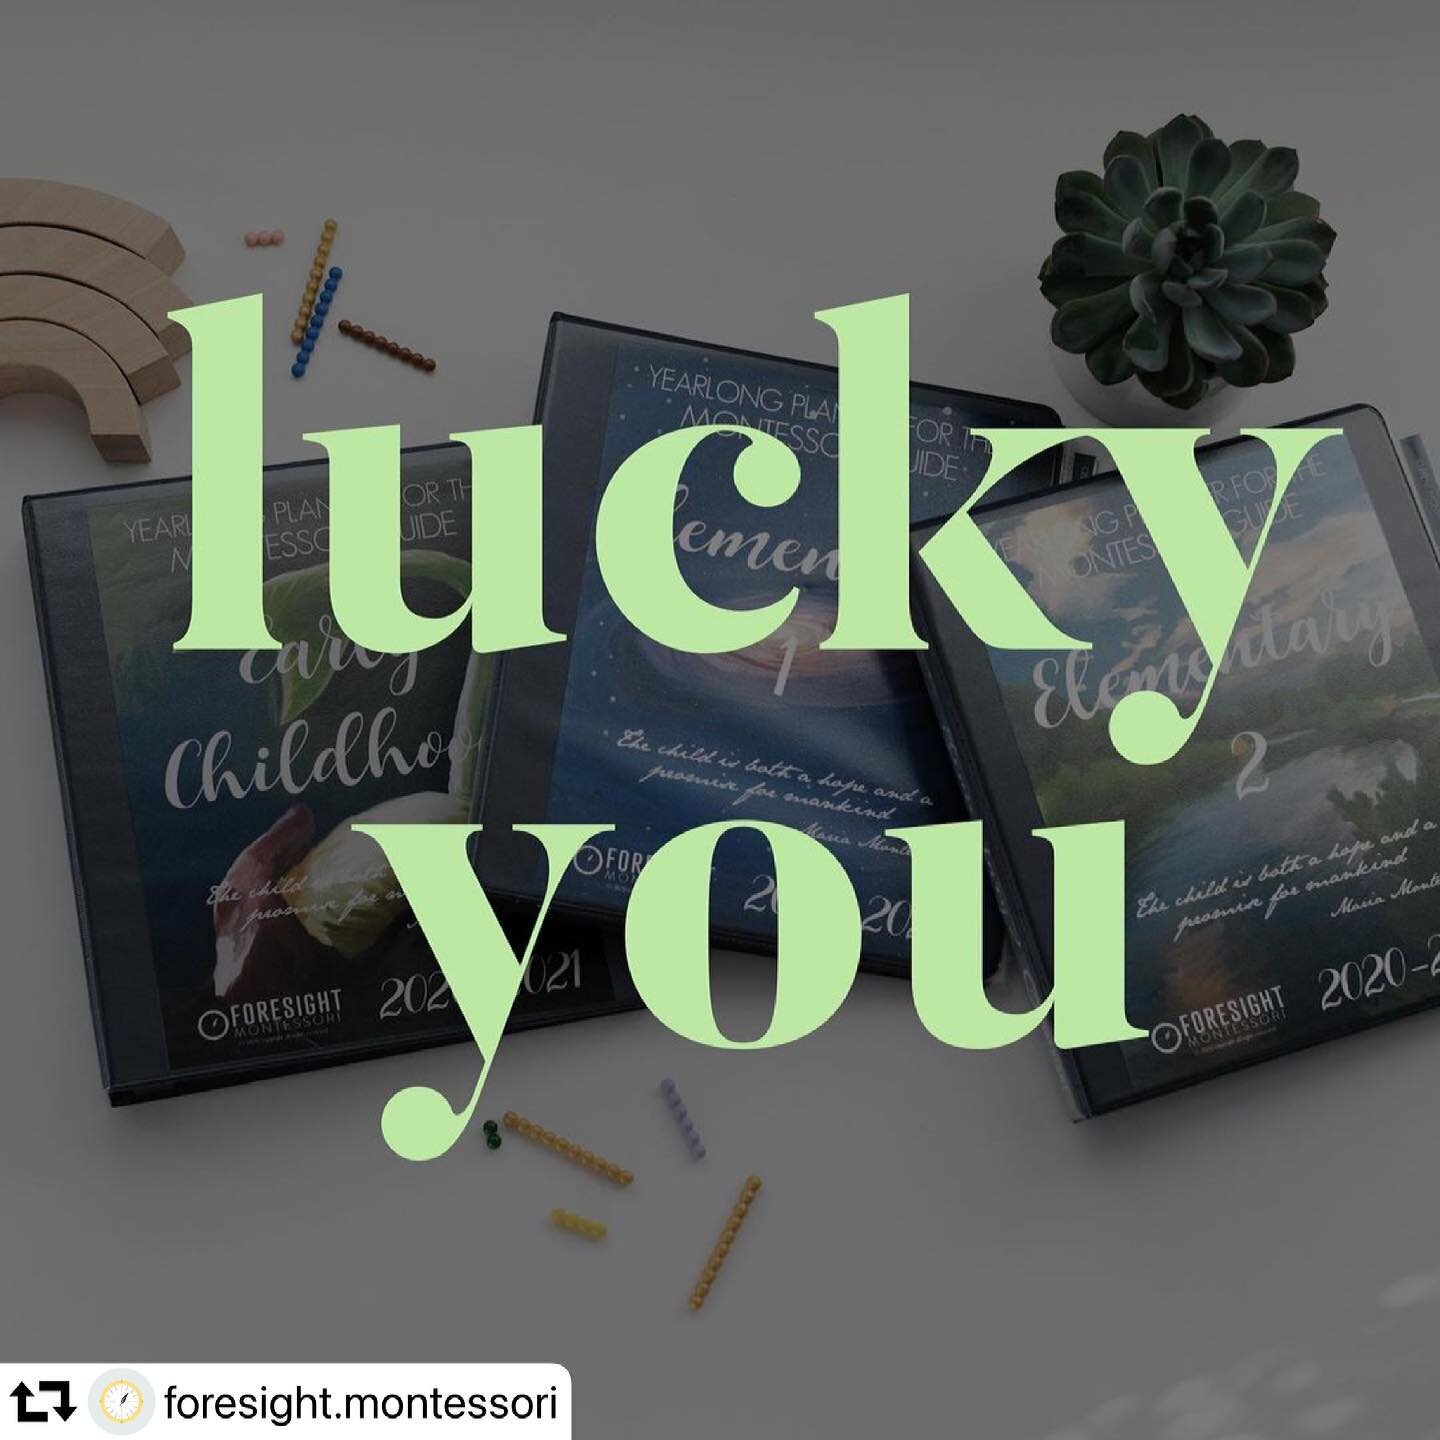 #repost @foresight.montessori
・・・
LUCKY YOU 🍀 You can save 30% on Planner Bundles until 3/21... But then they are gone!! Link in bio